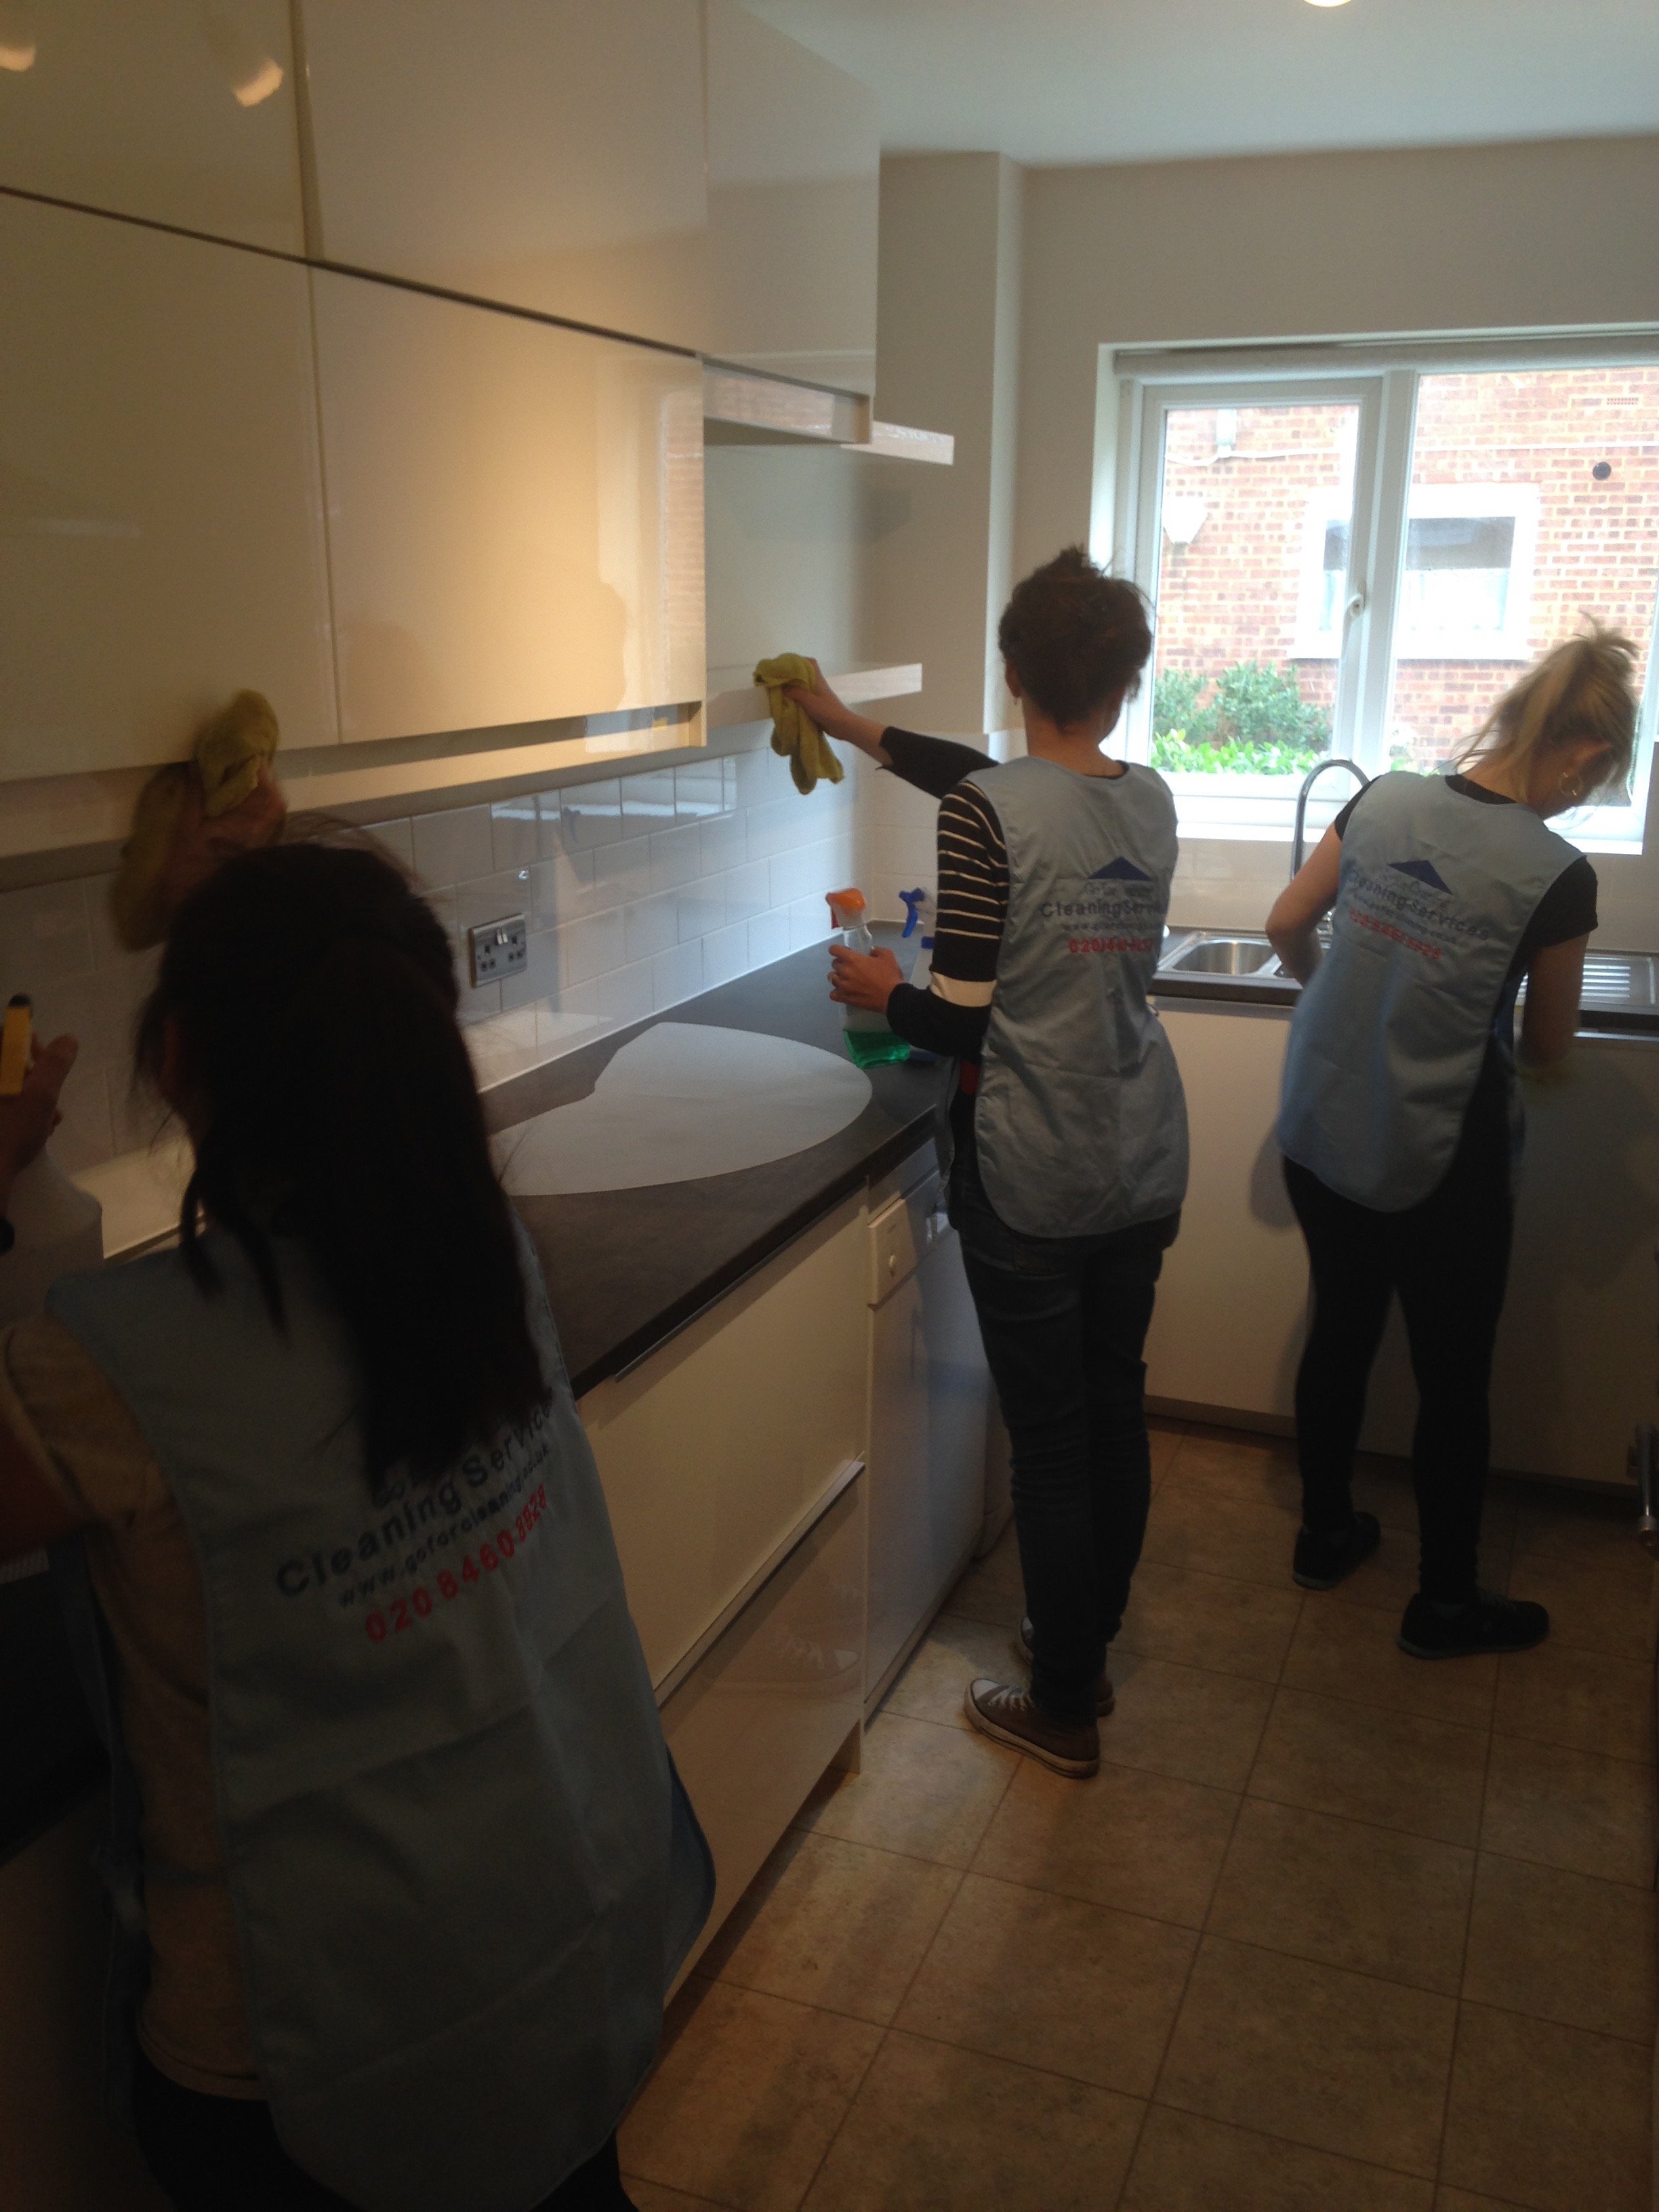 Team+of+cleaners+in+kitchen+SW20.jpg